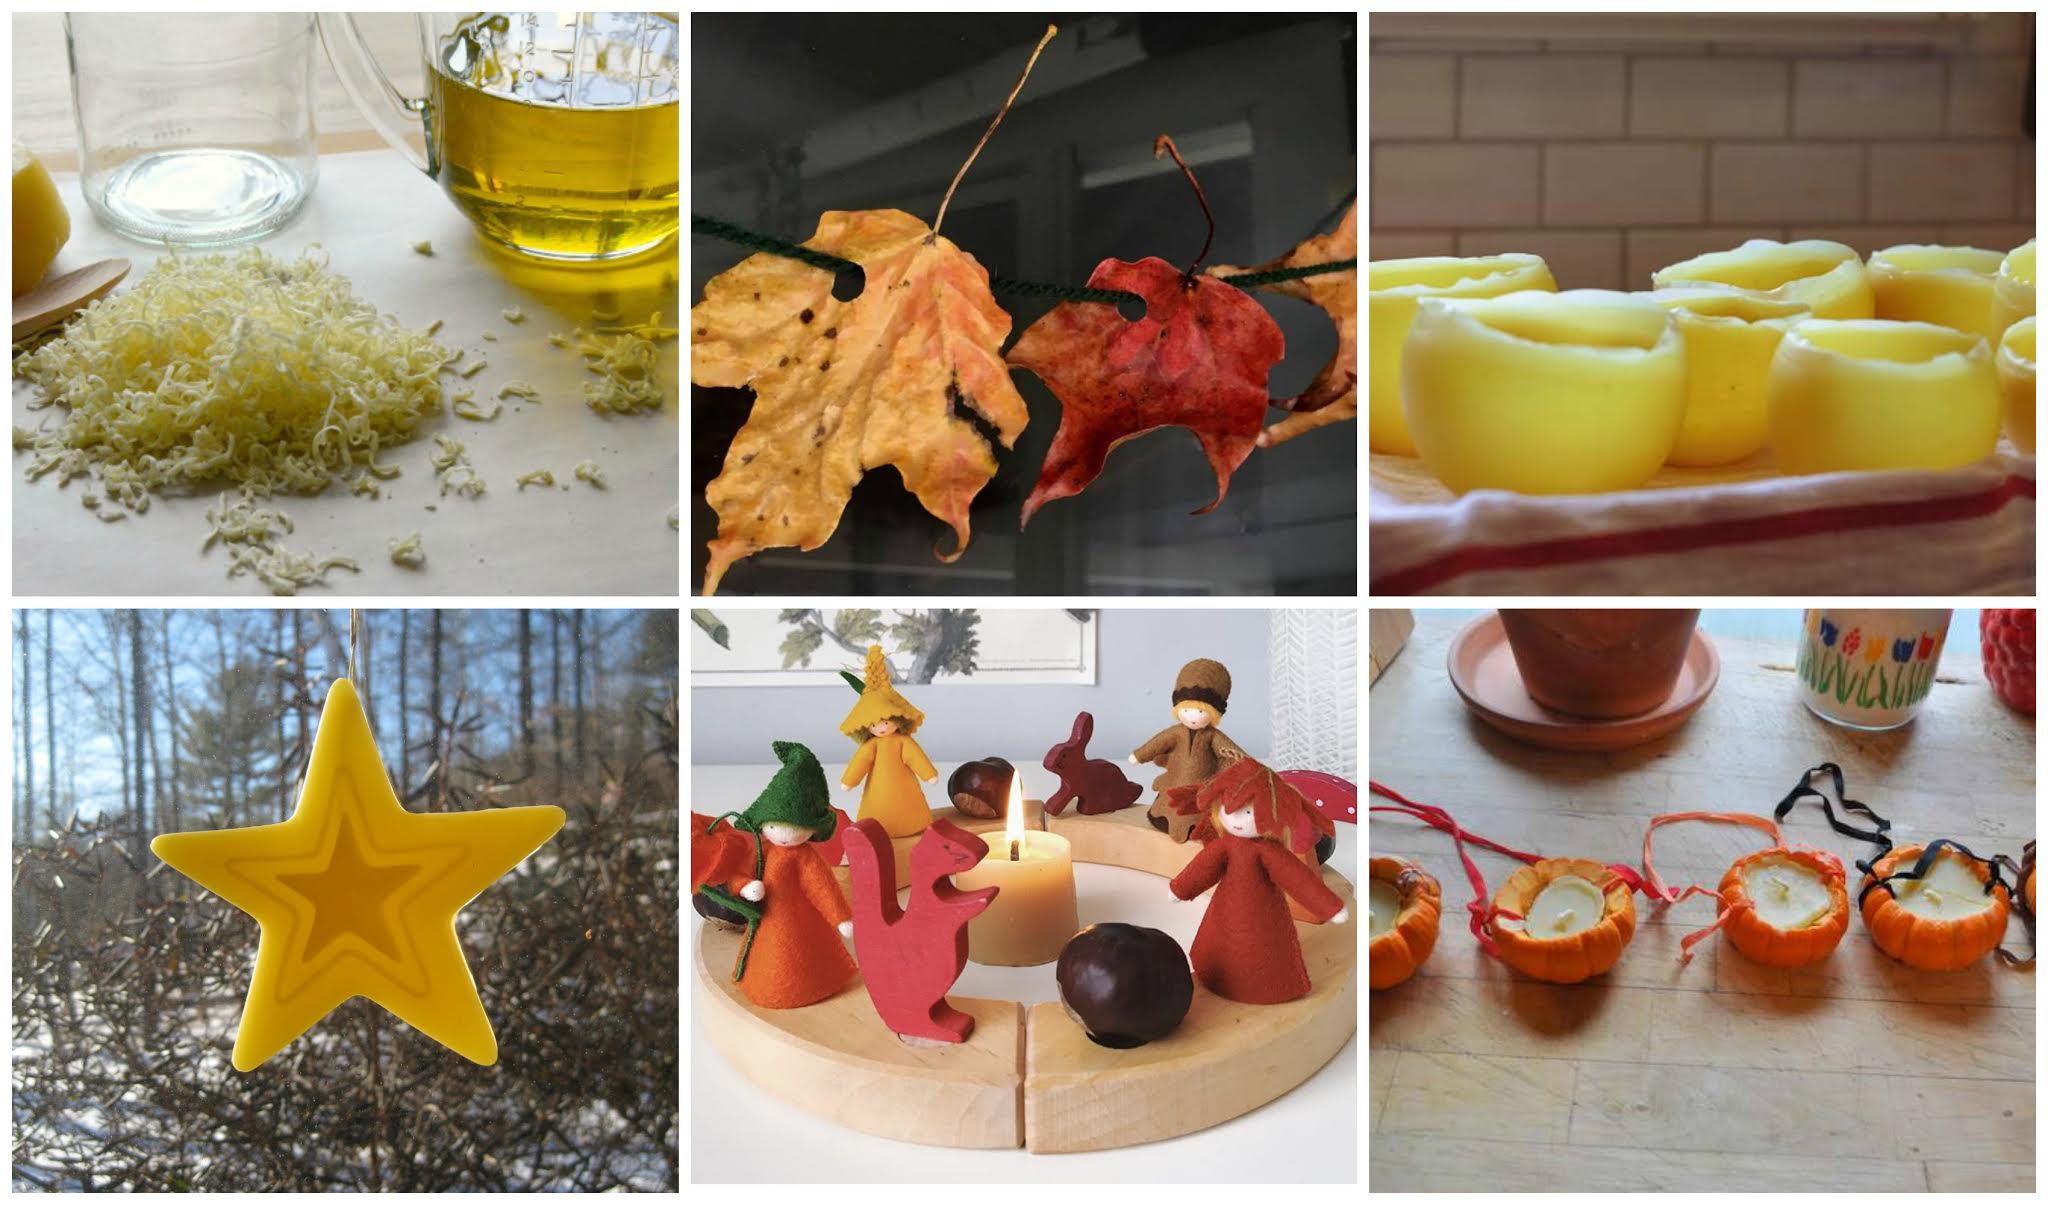 Montessori friendly beeswax projects and inspiration for children and adults